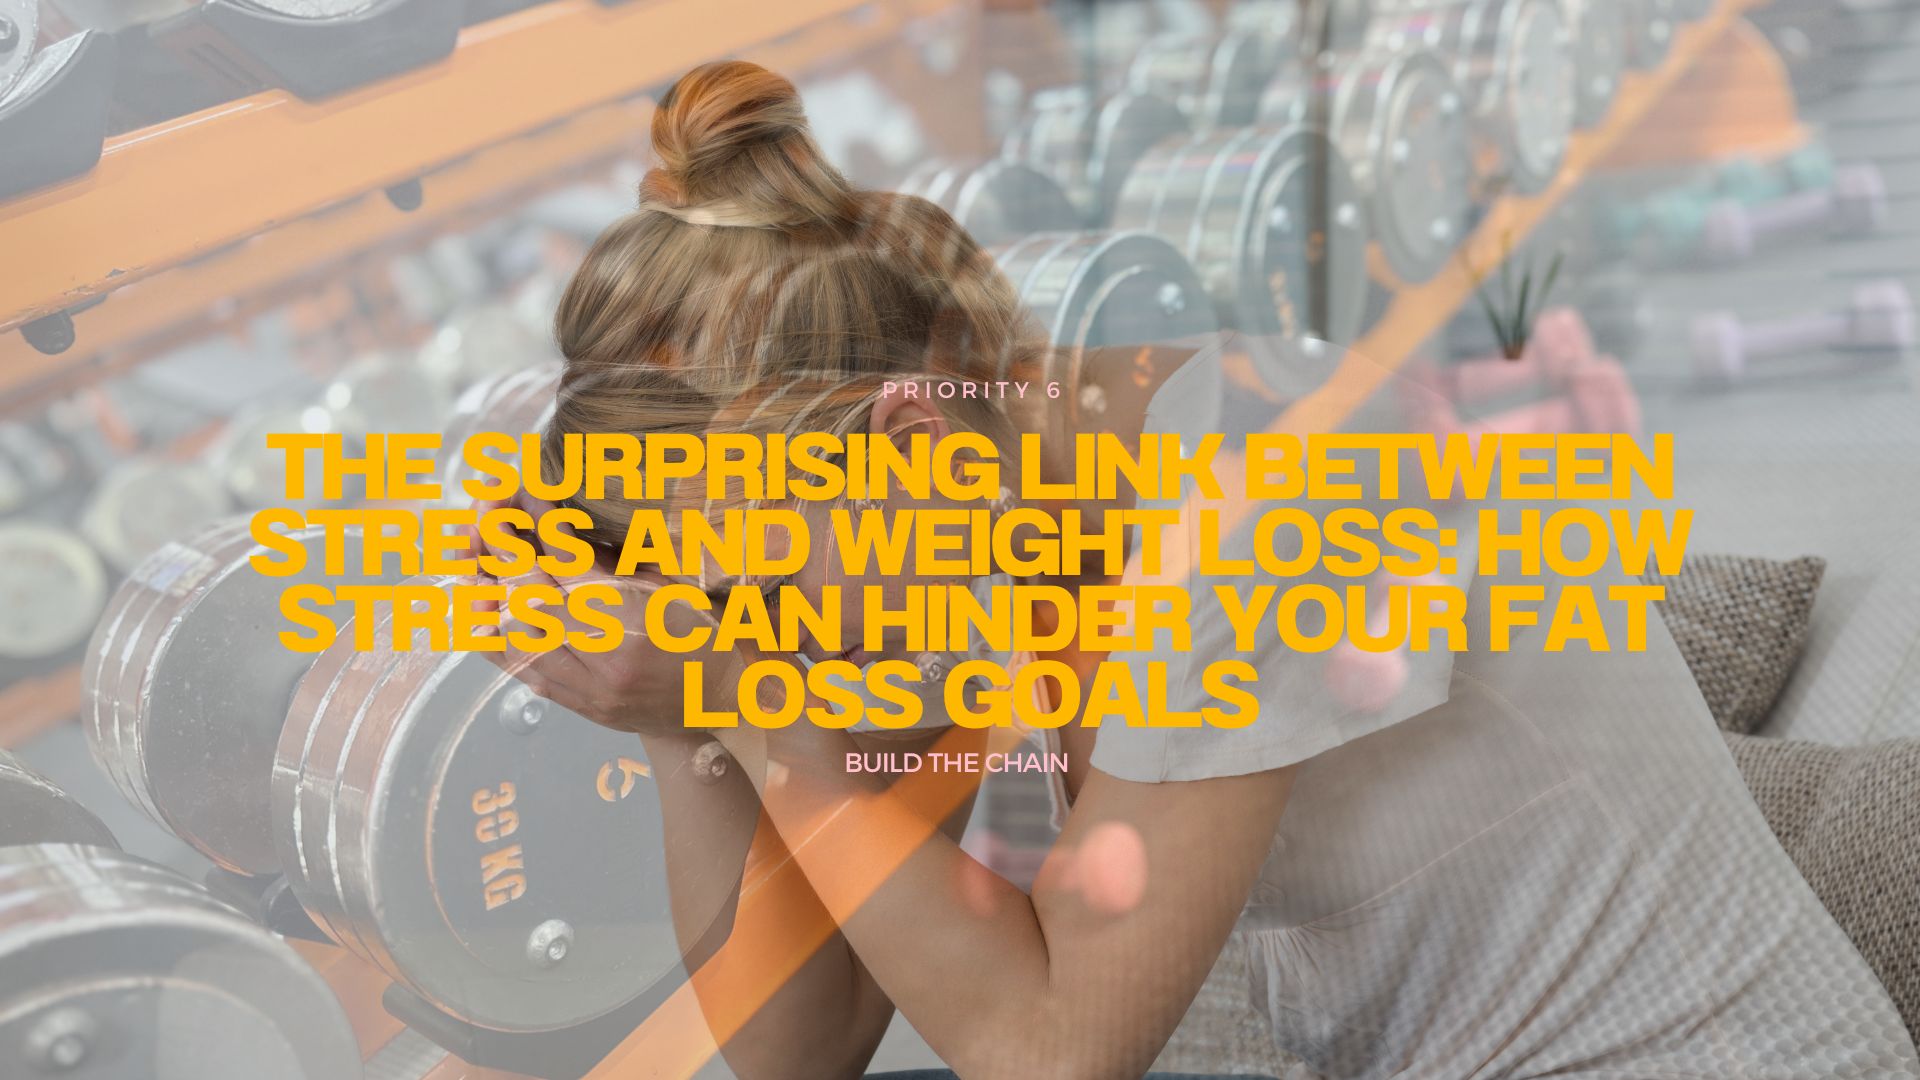 The Surprising Link Between STRESS and Weight Loss….